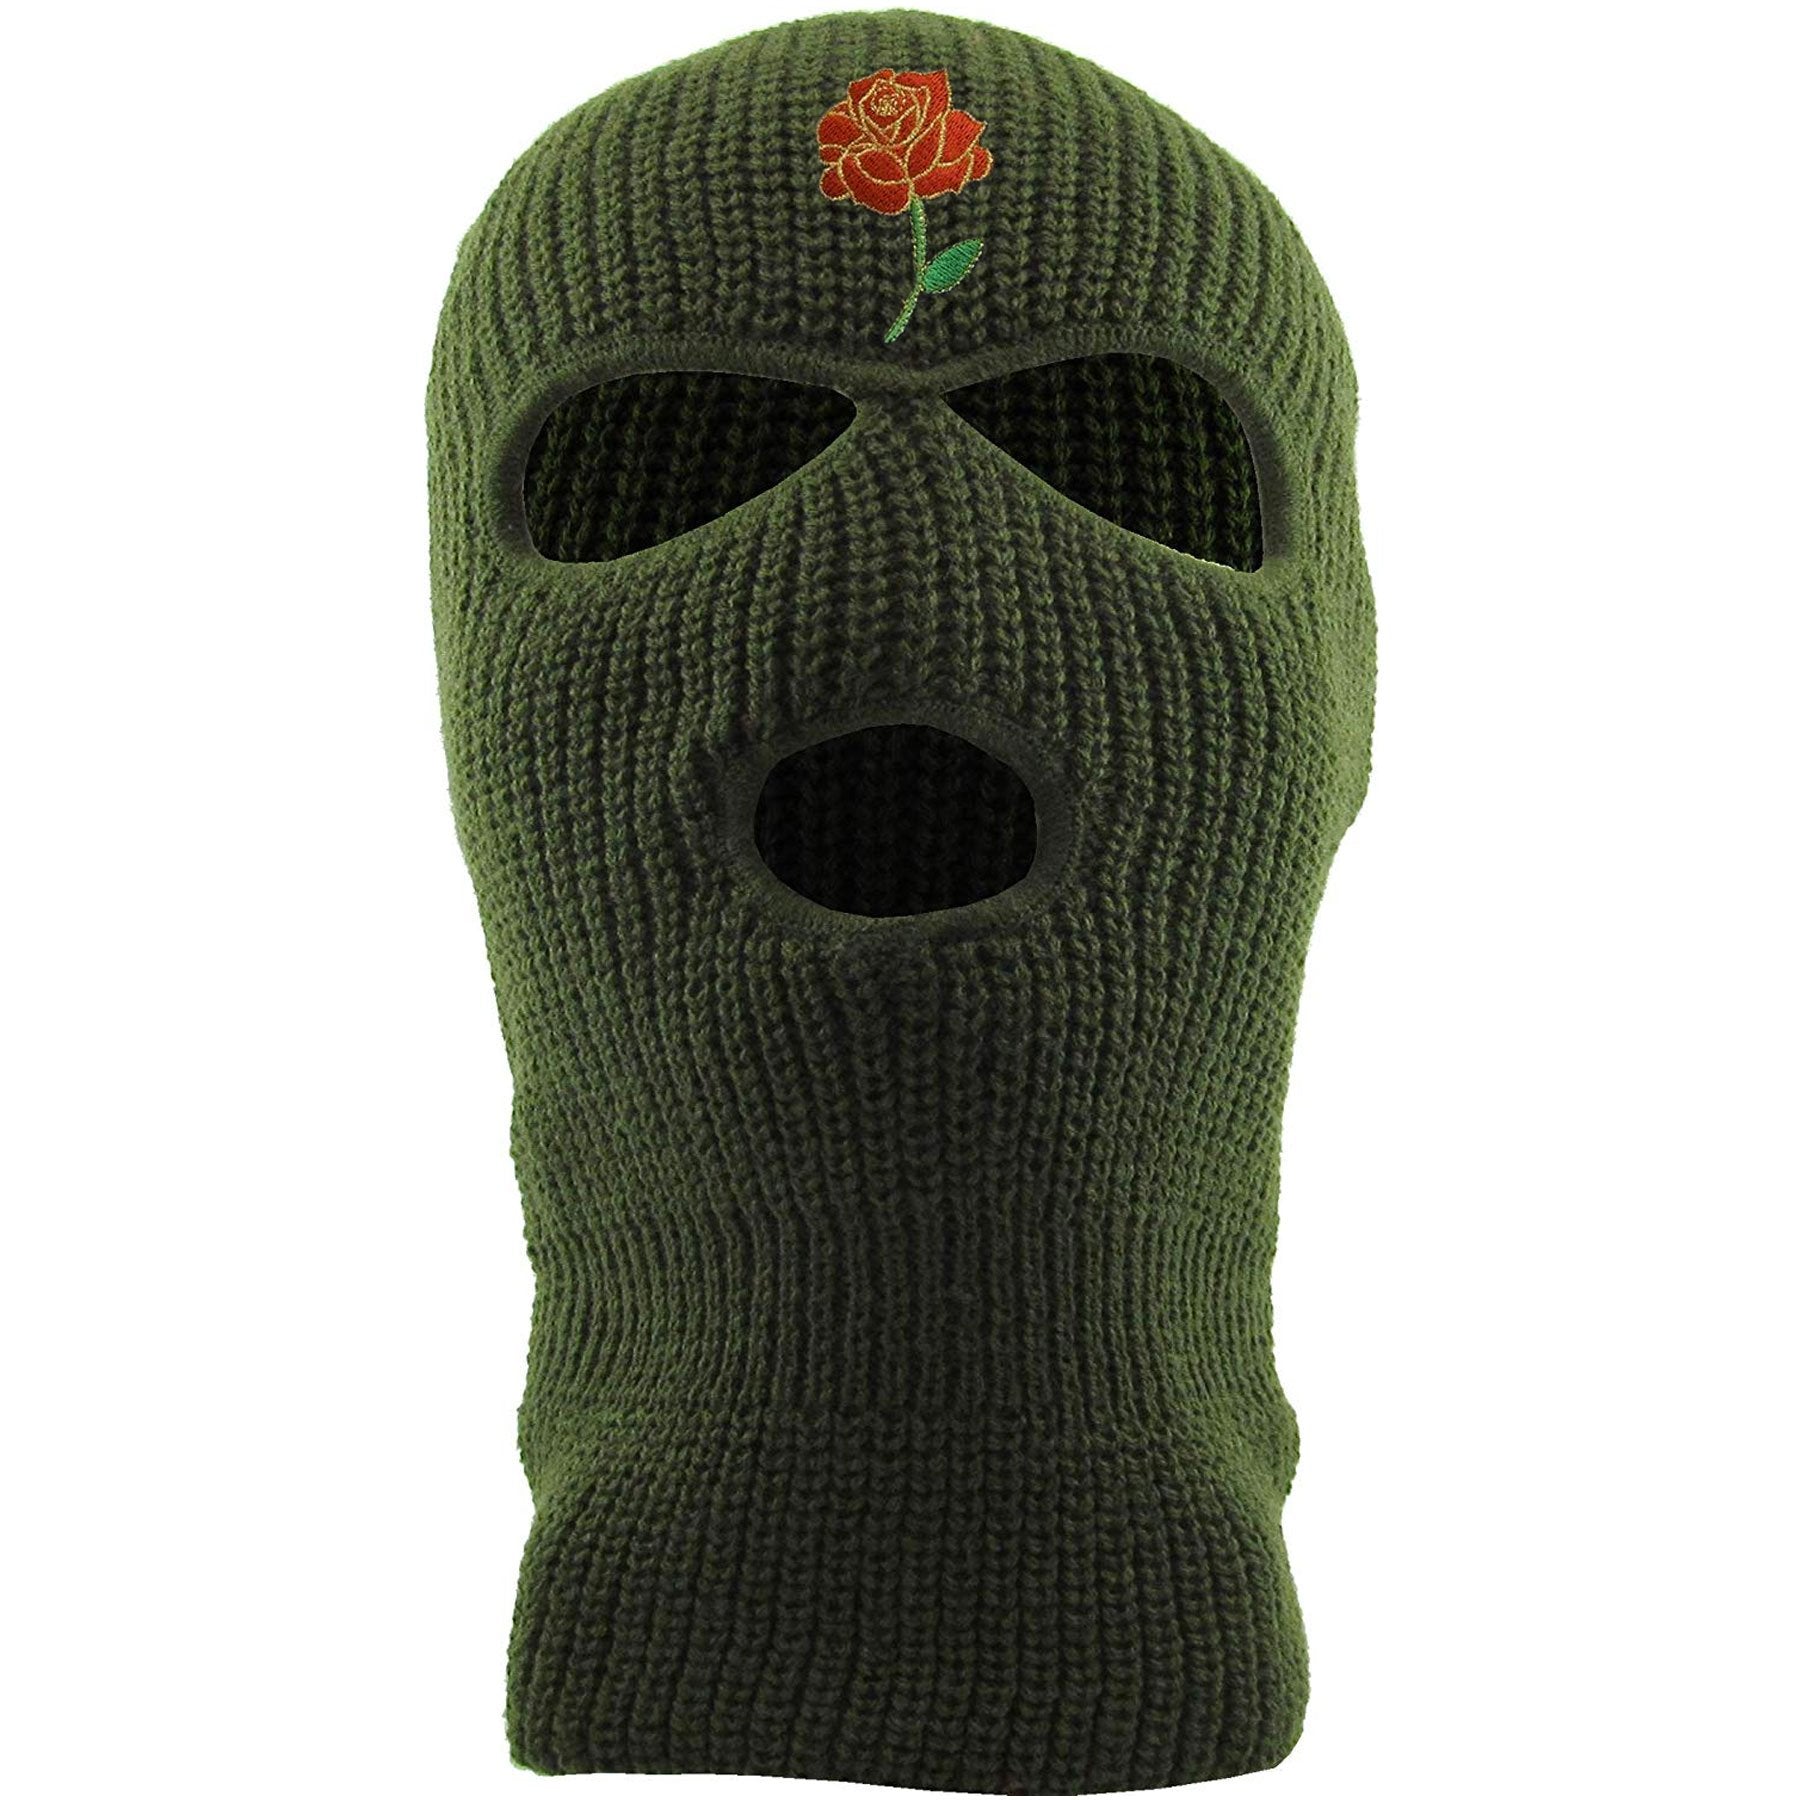 Embroidered on the front of the olive ski mask is the rose bud logo in red, gold and green